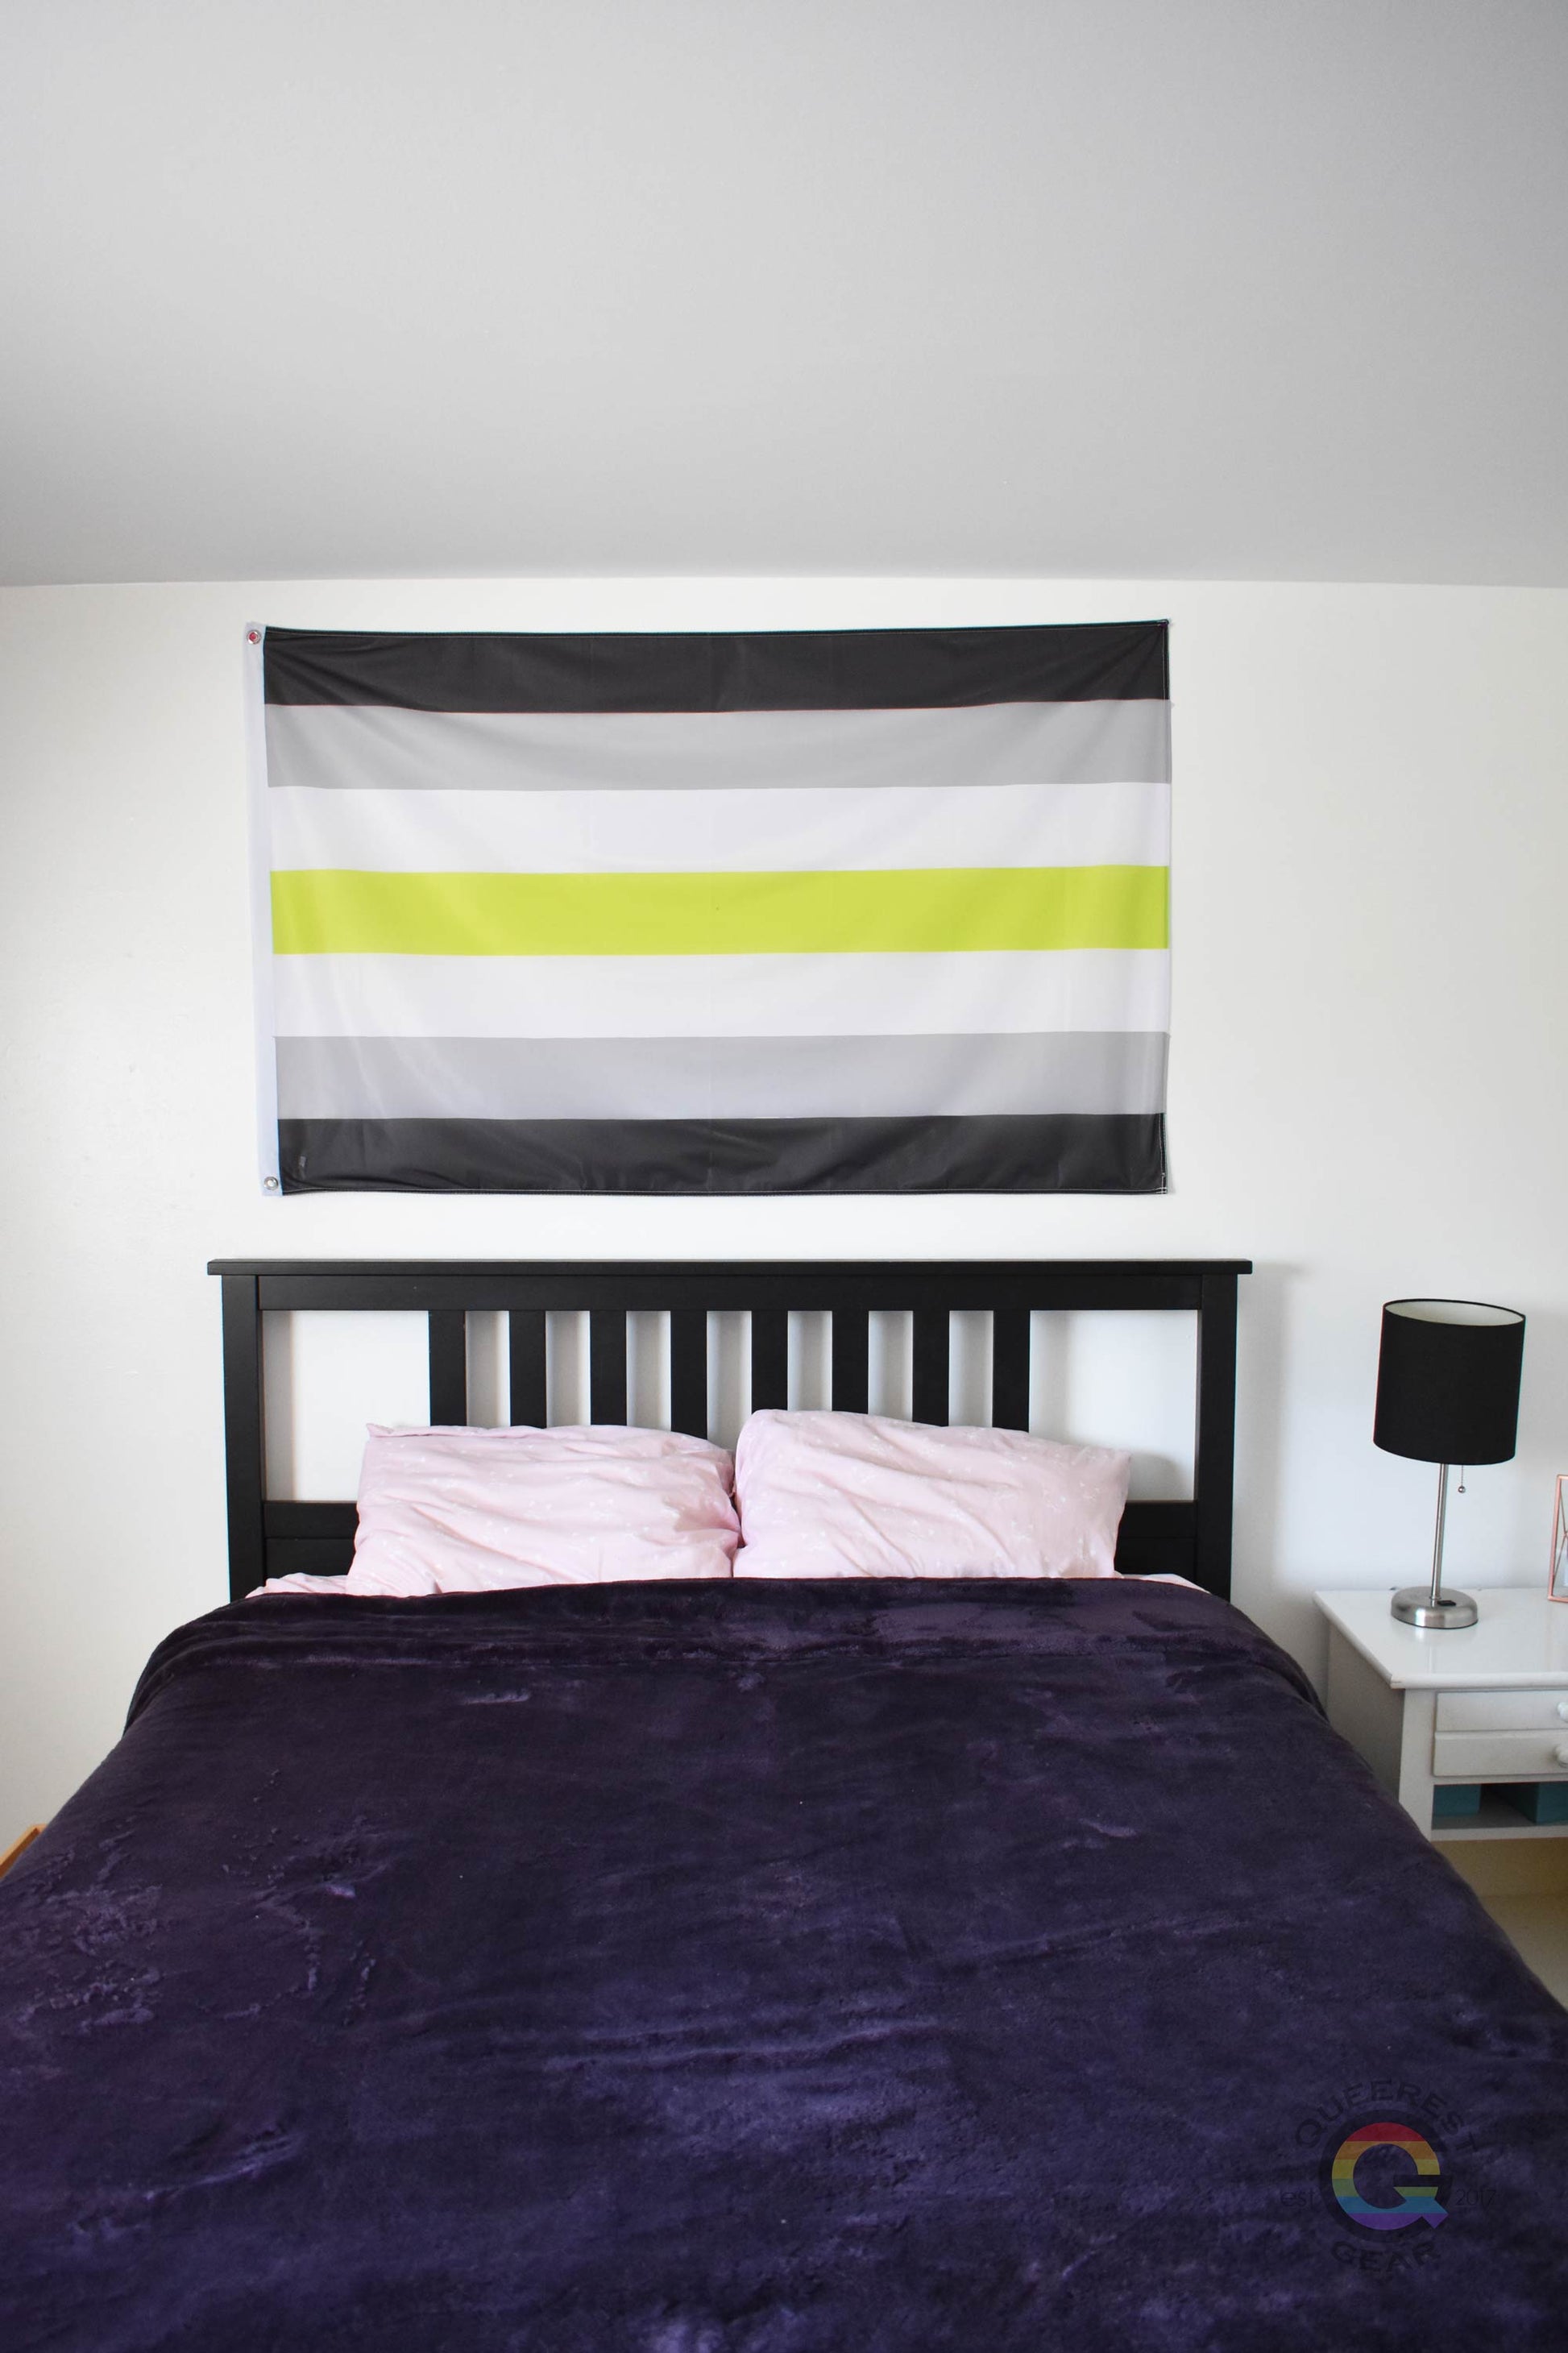 3’x5’ agender pride flag hanging horizontally on the wall of a bedroom centered above a bed with a purple blanket